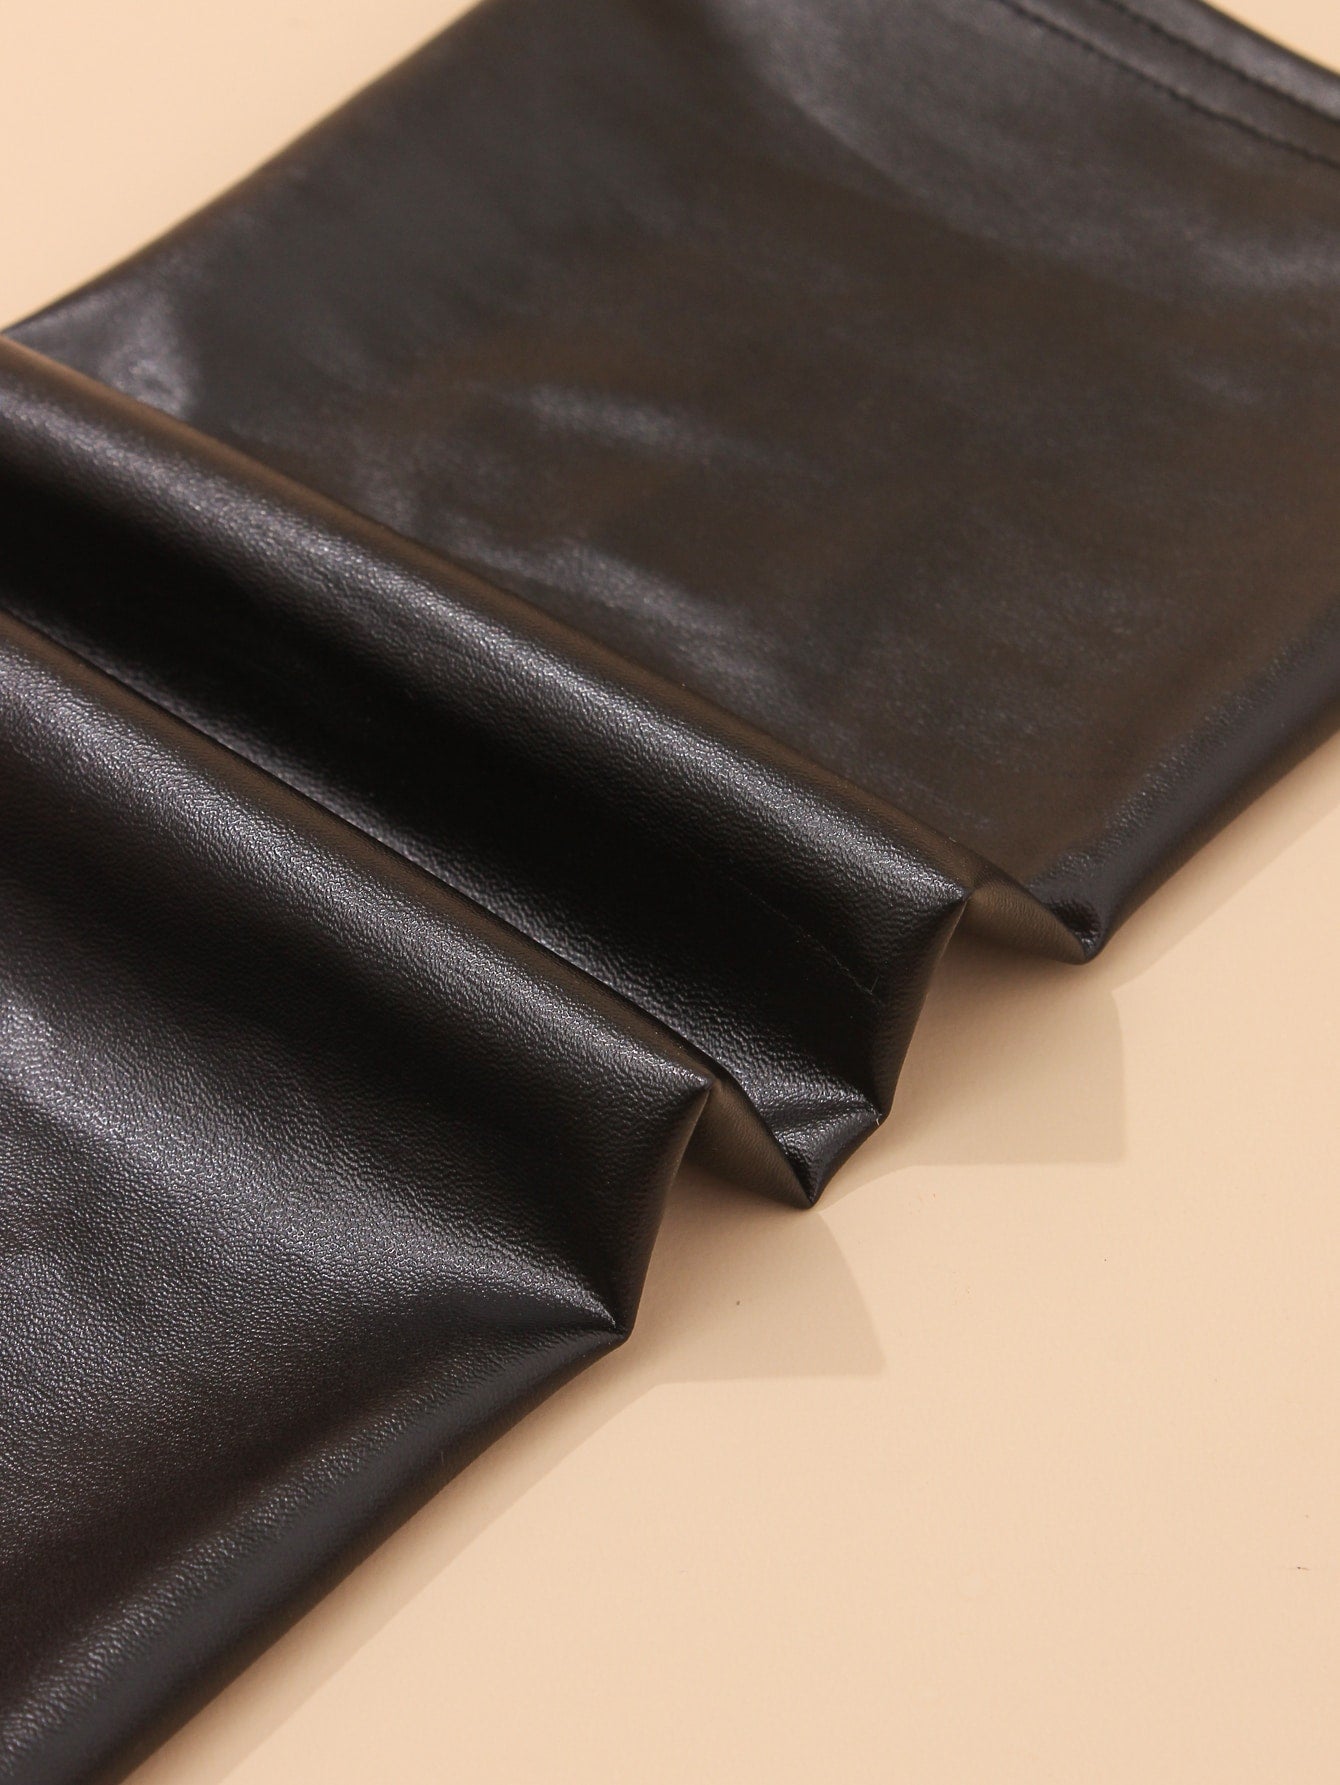 PU Leather Over The Knee Leg Sleeves